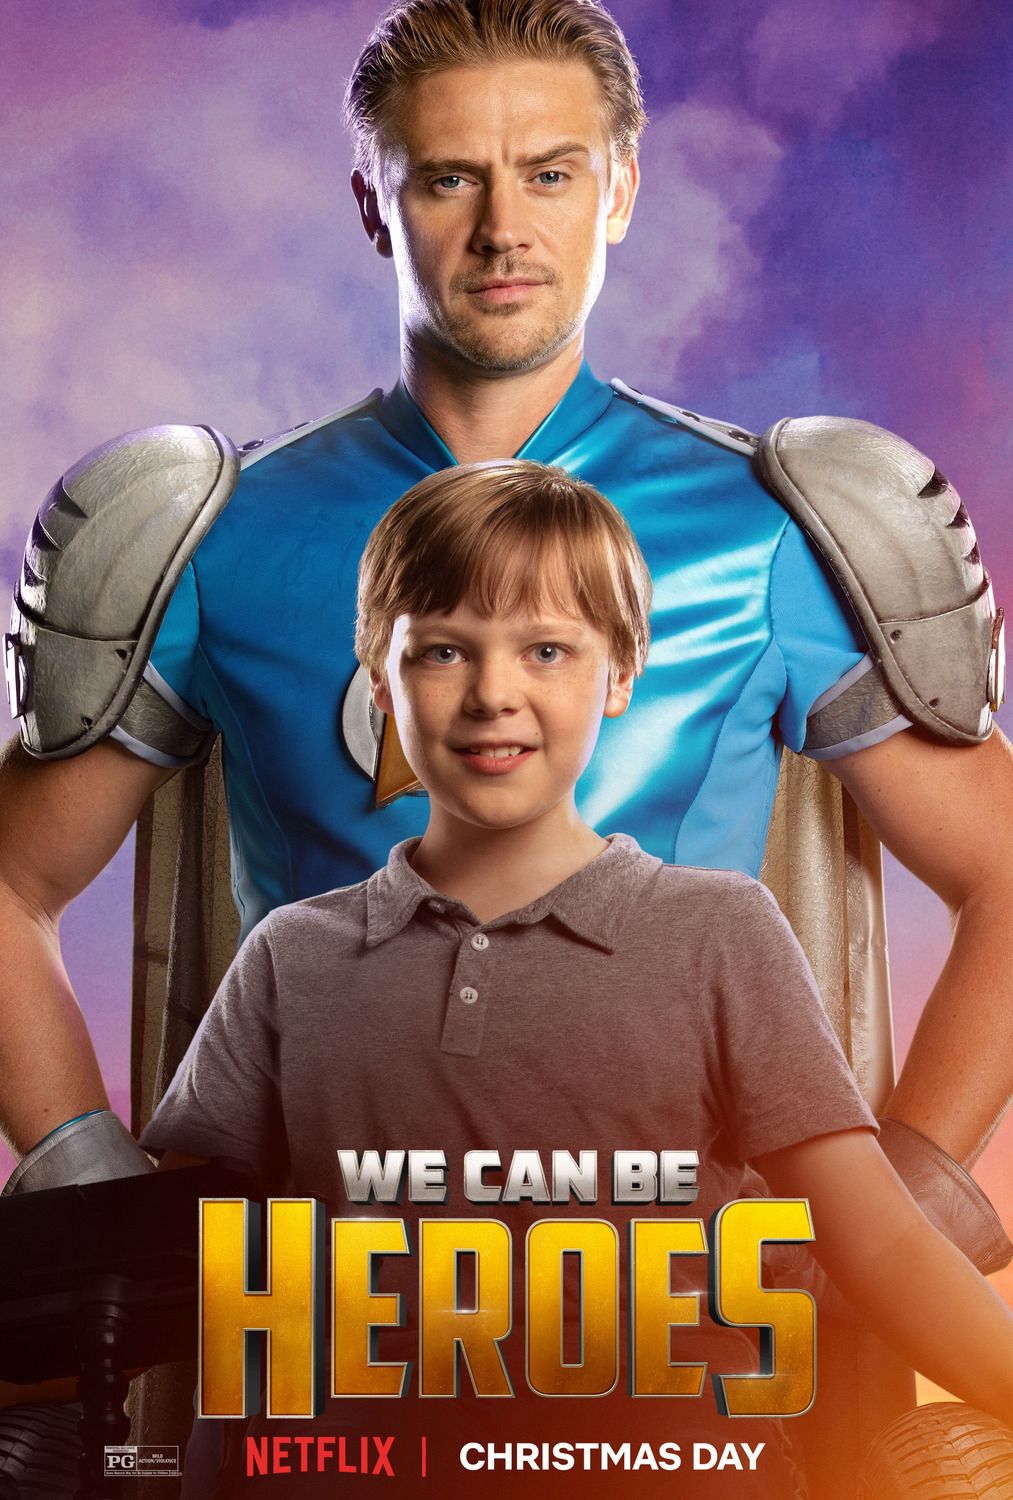 We Can Be Heroes Character Poster #10